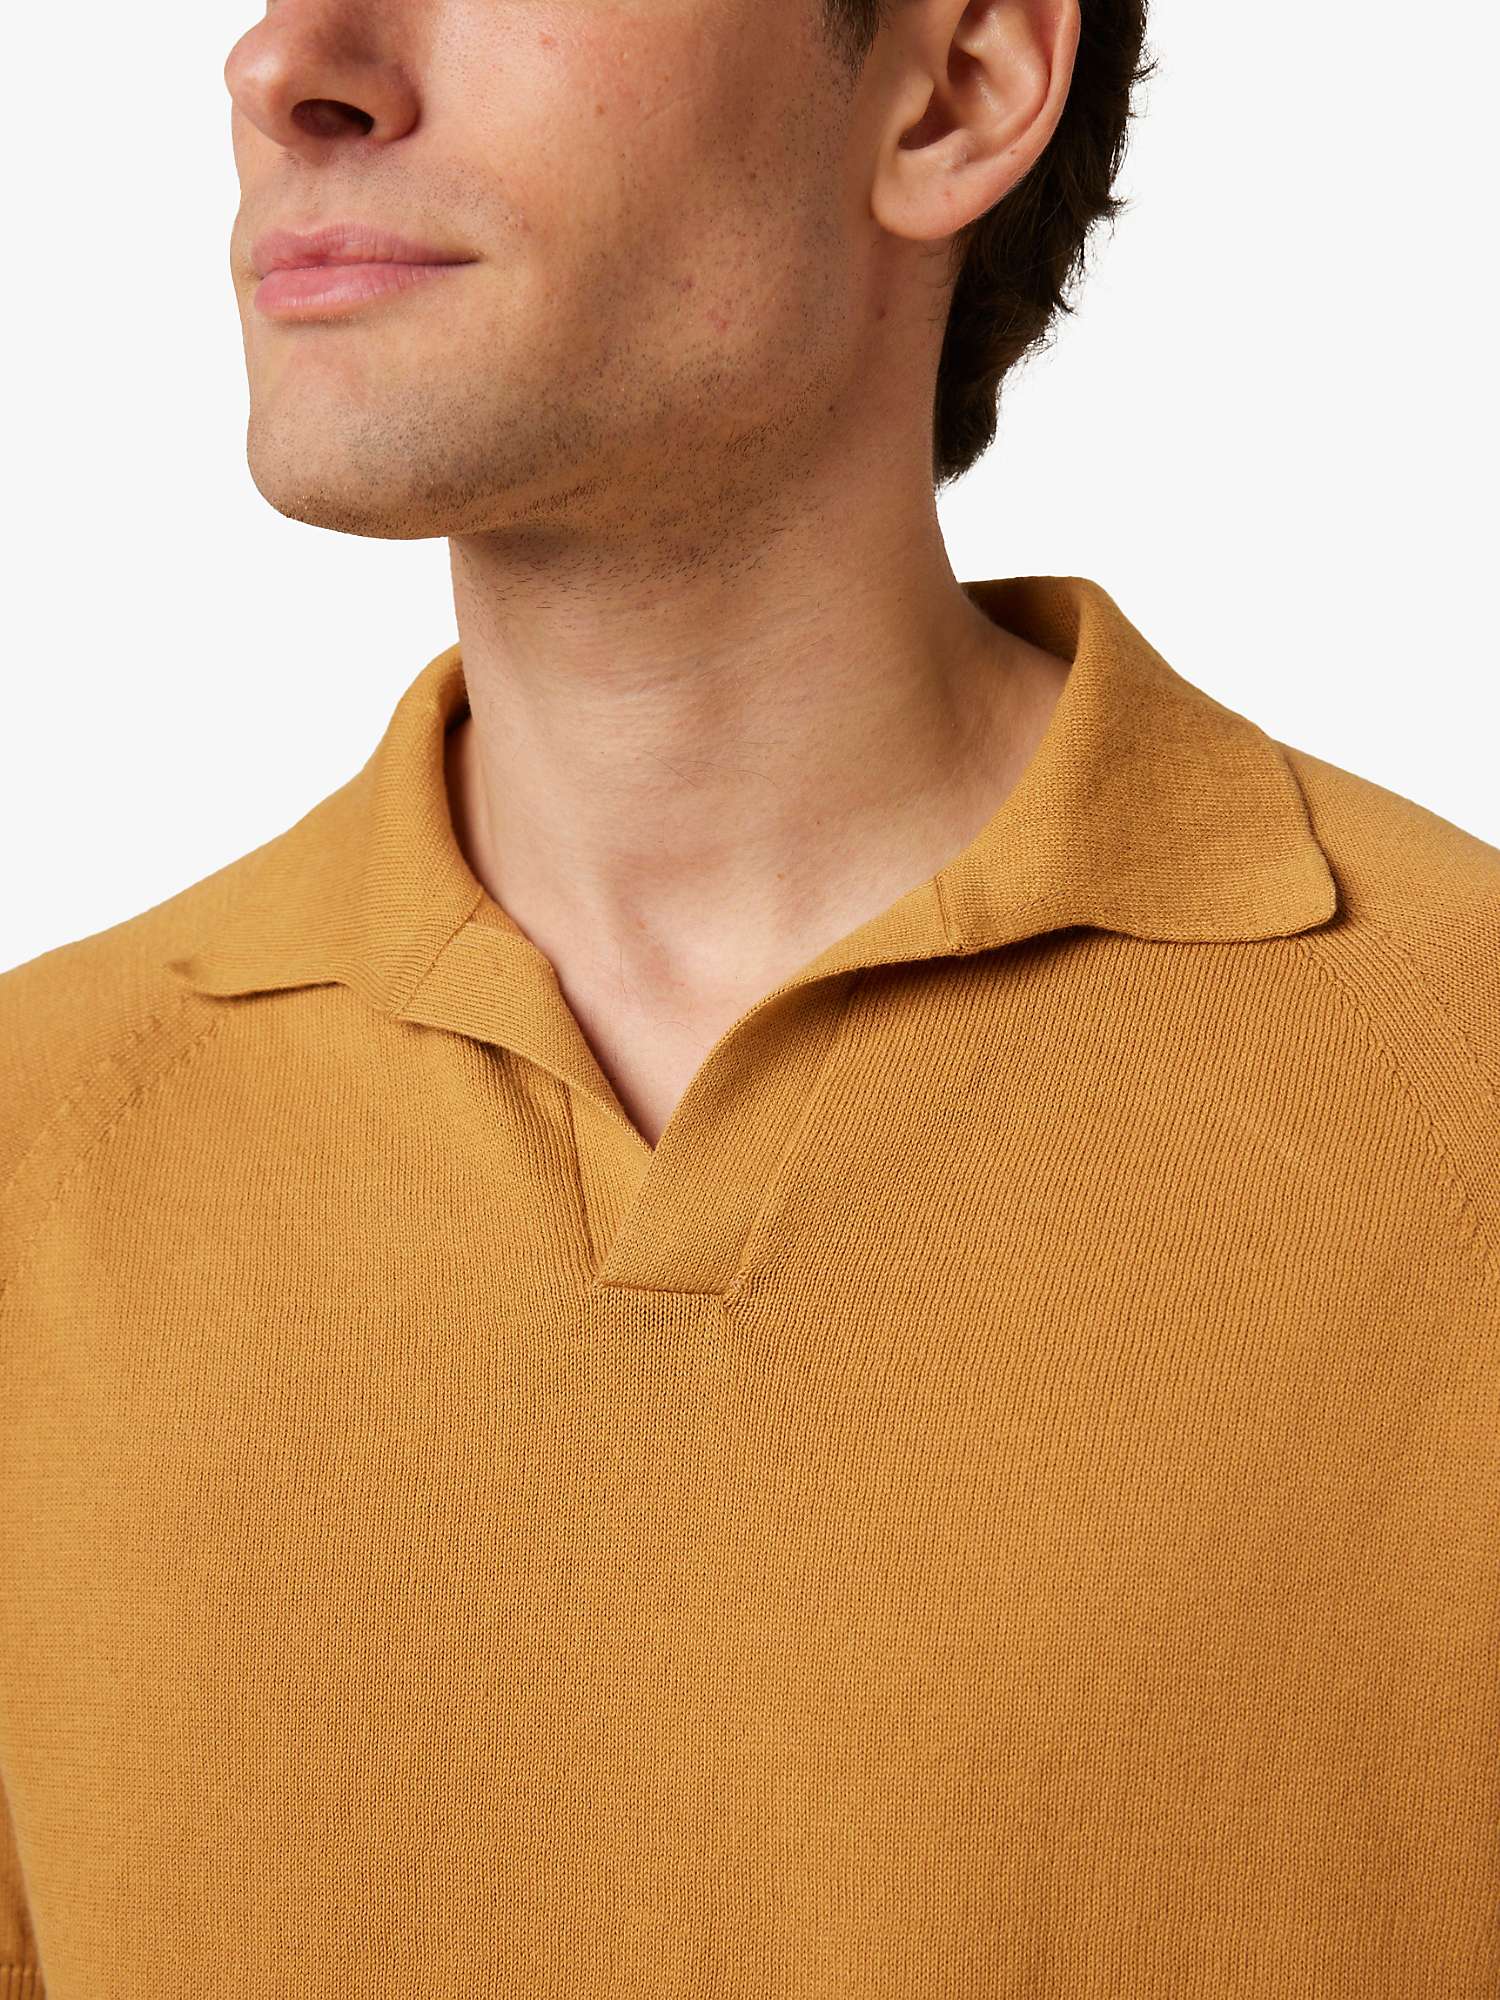 Buy Peregrine Emery Polo Shirt, Amber Online at johnlewis.com